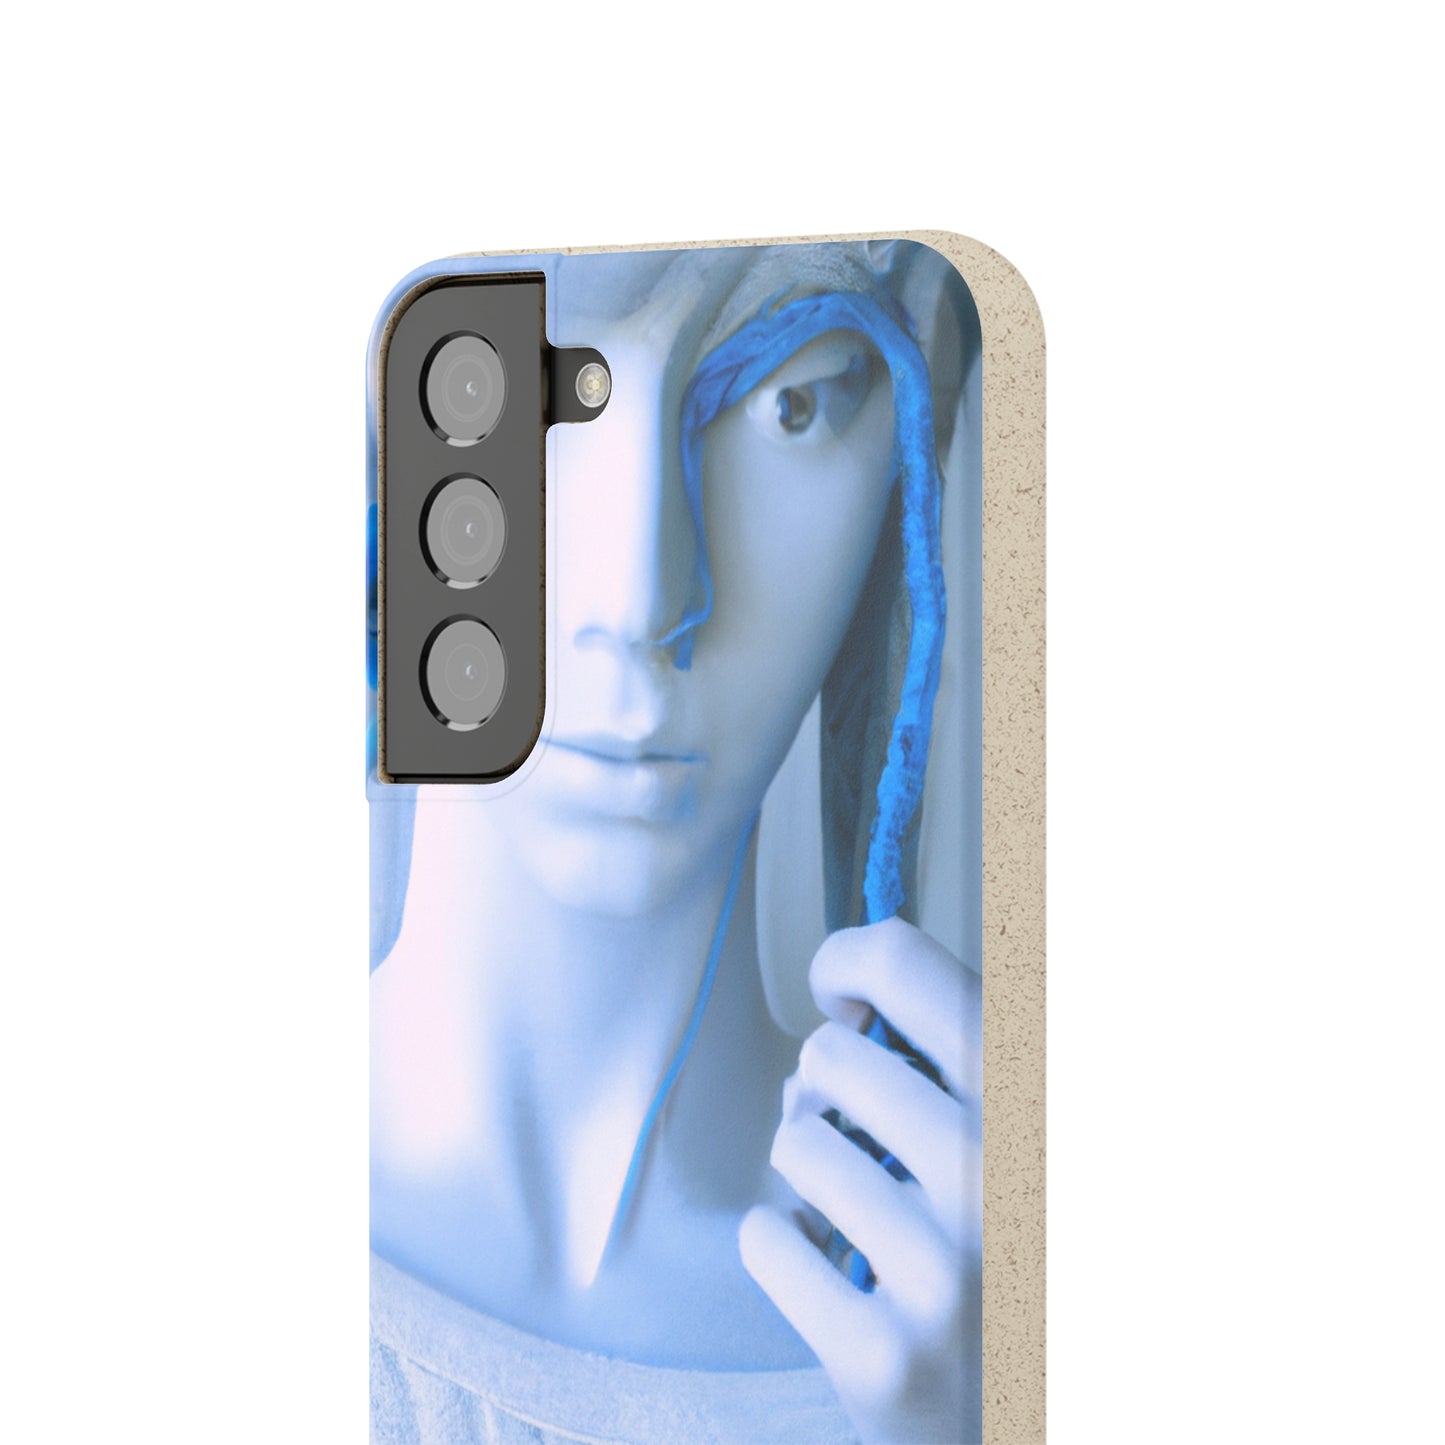 "My Reflection: Capturing What Matters Most" - Bam Boo! Lifestyle Eco-friendly Cases